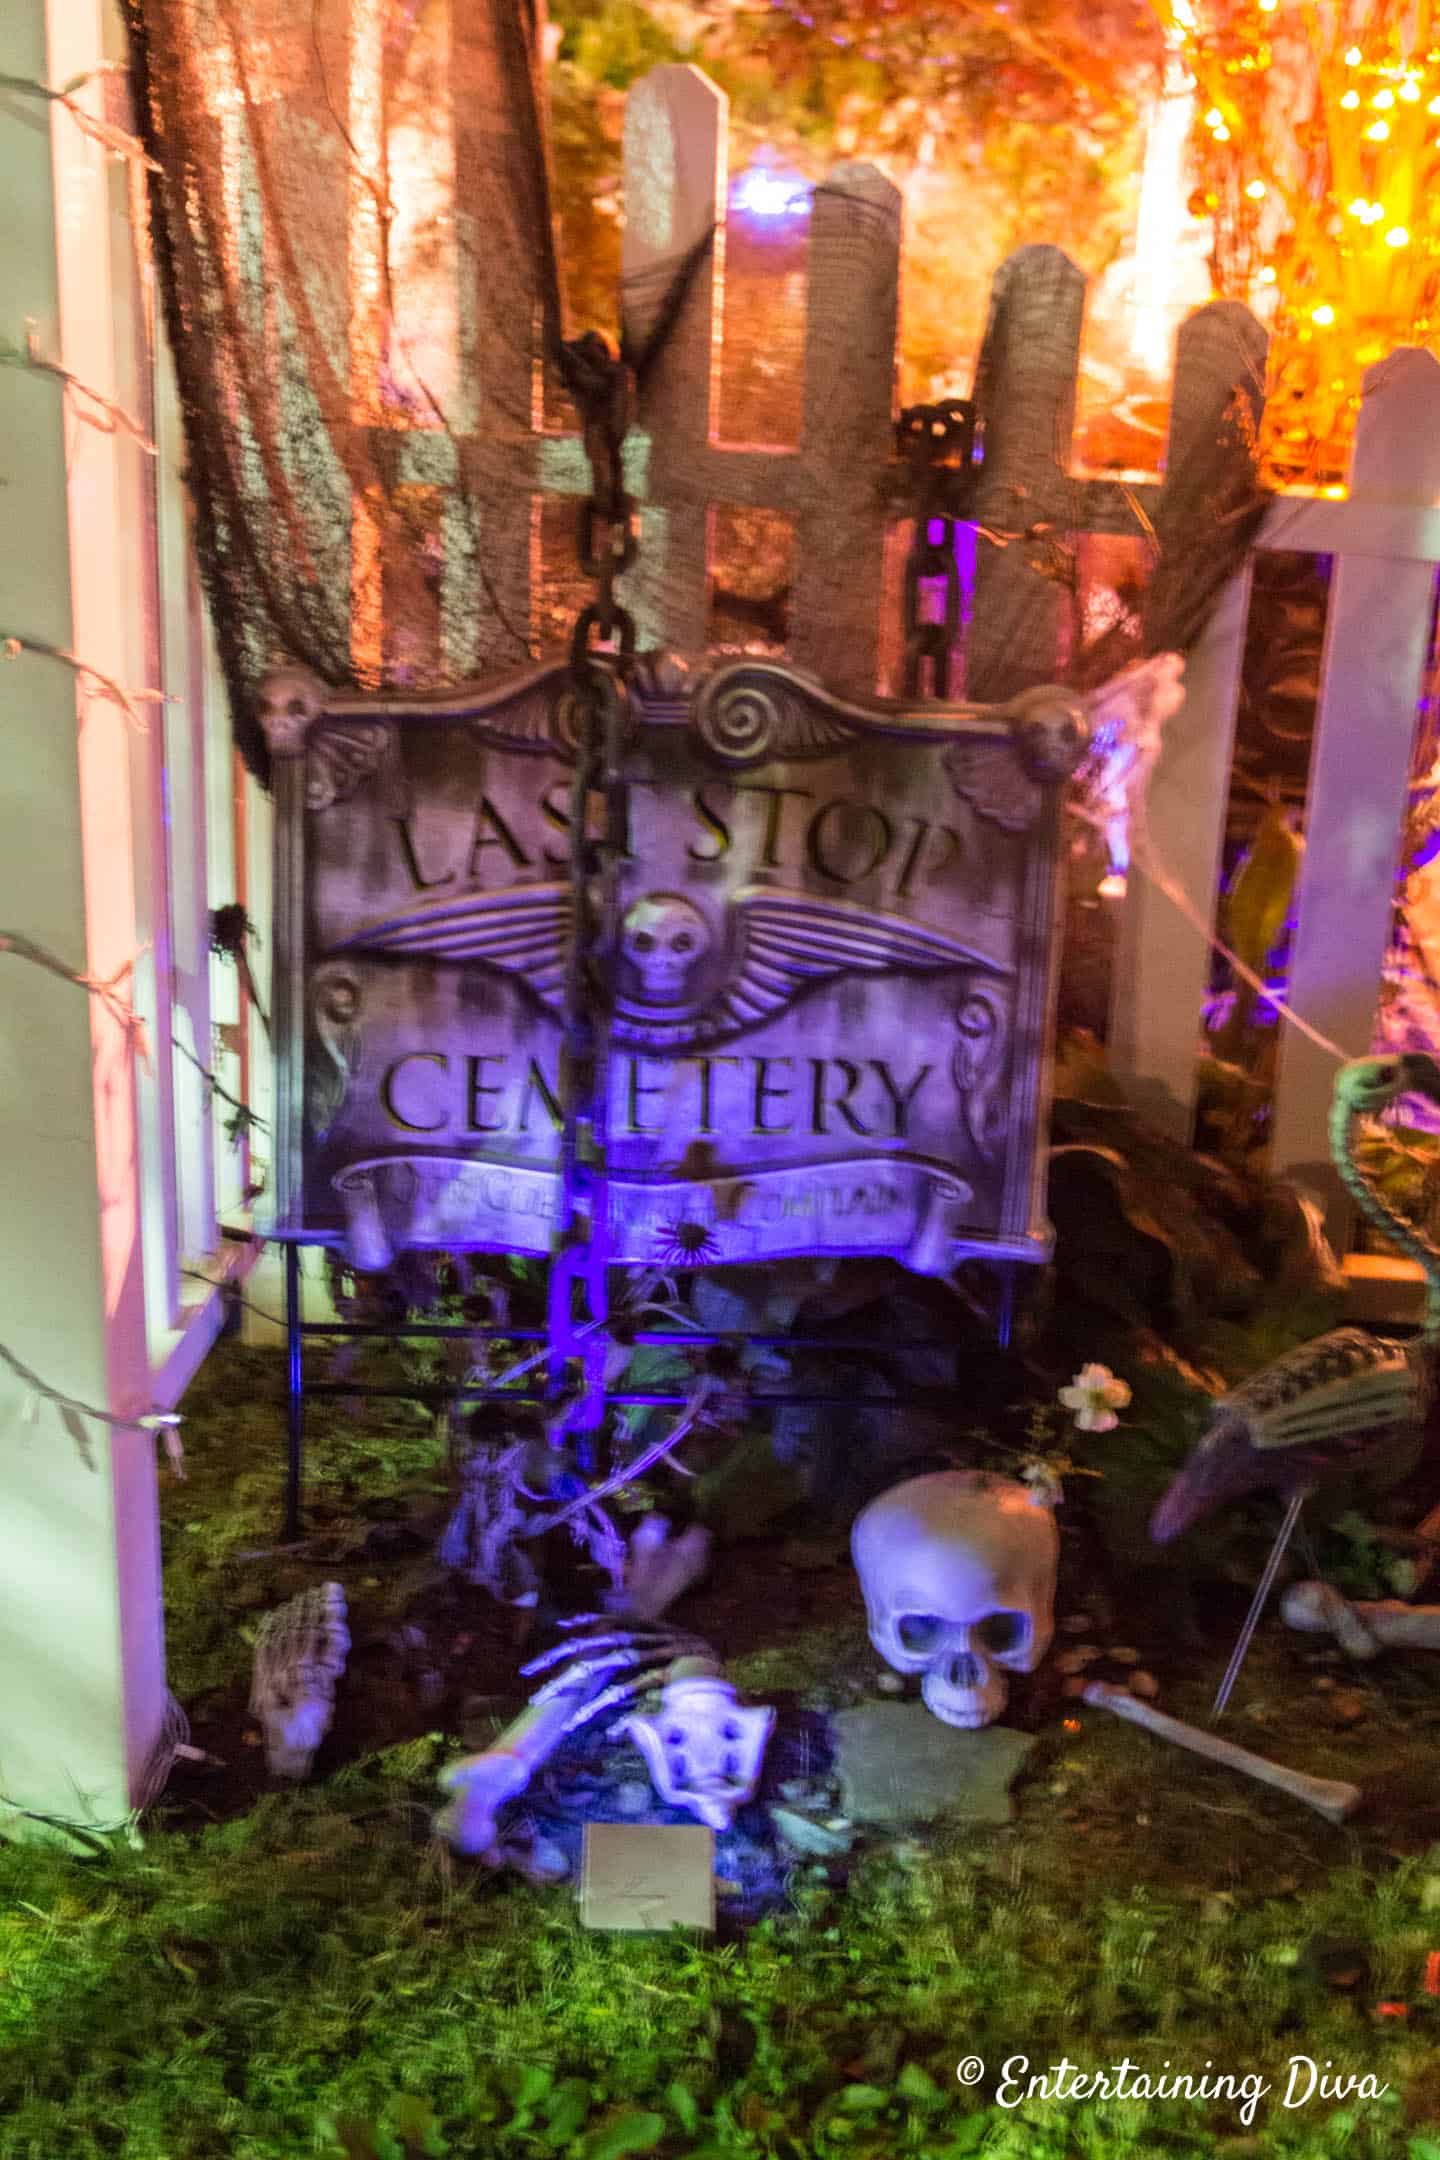 Halloween graveyard with chains over a cemetery sign and skeleton bones